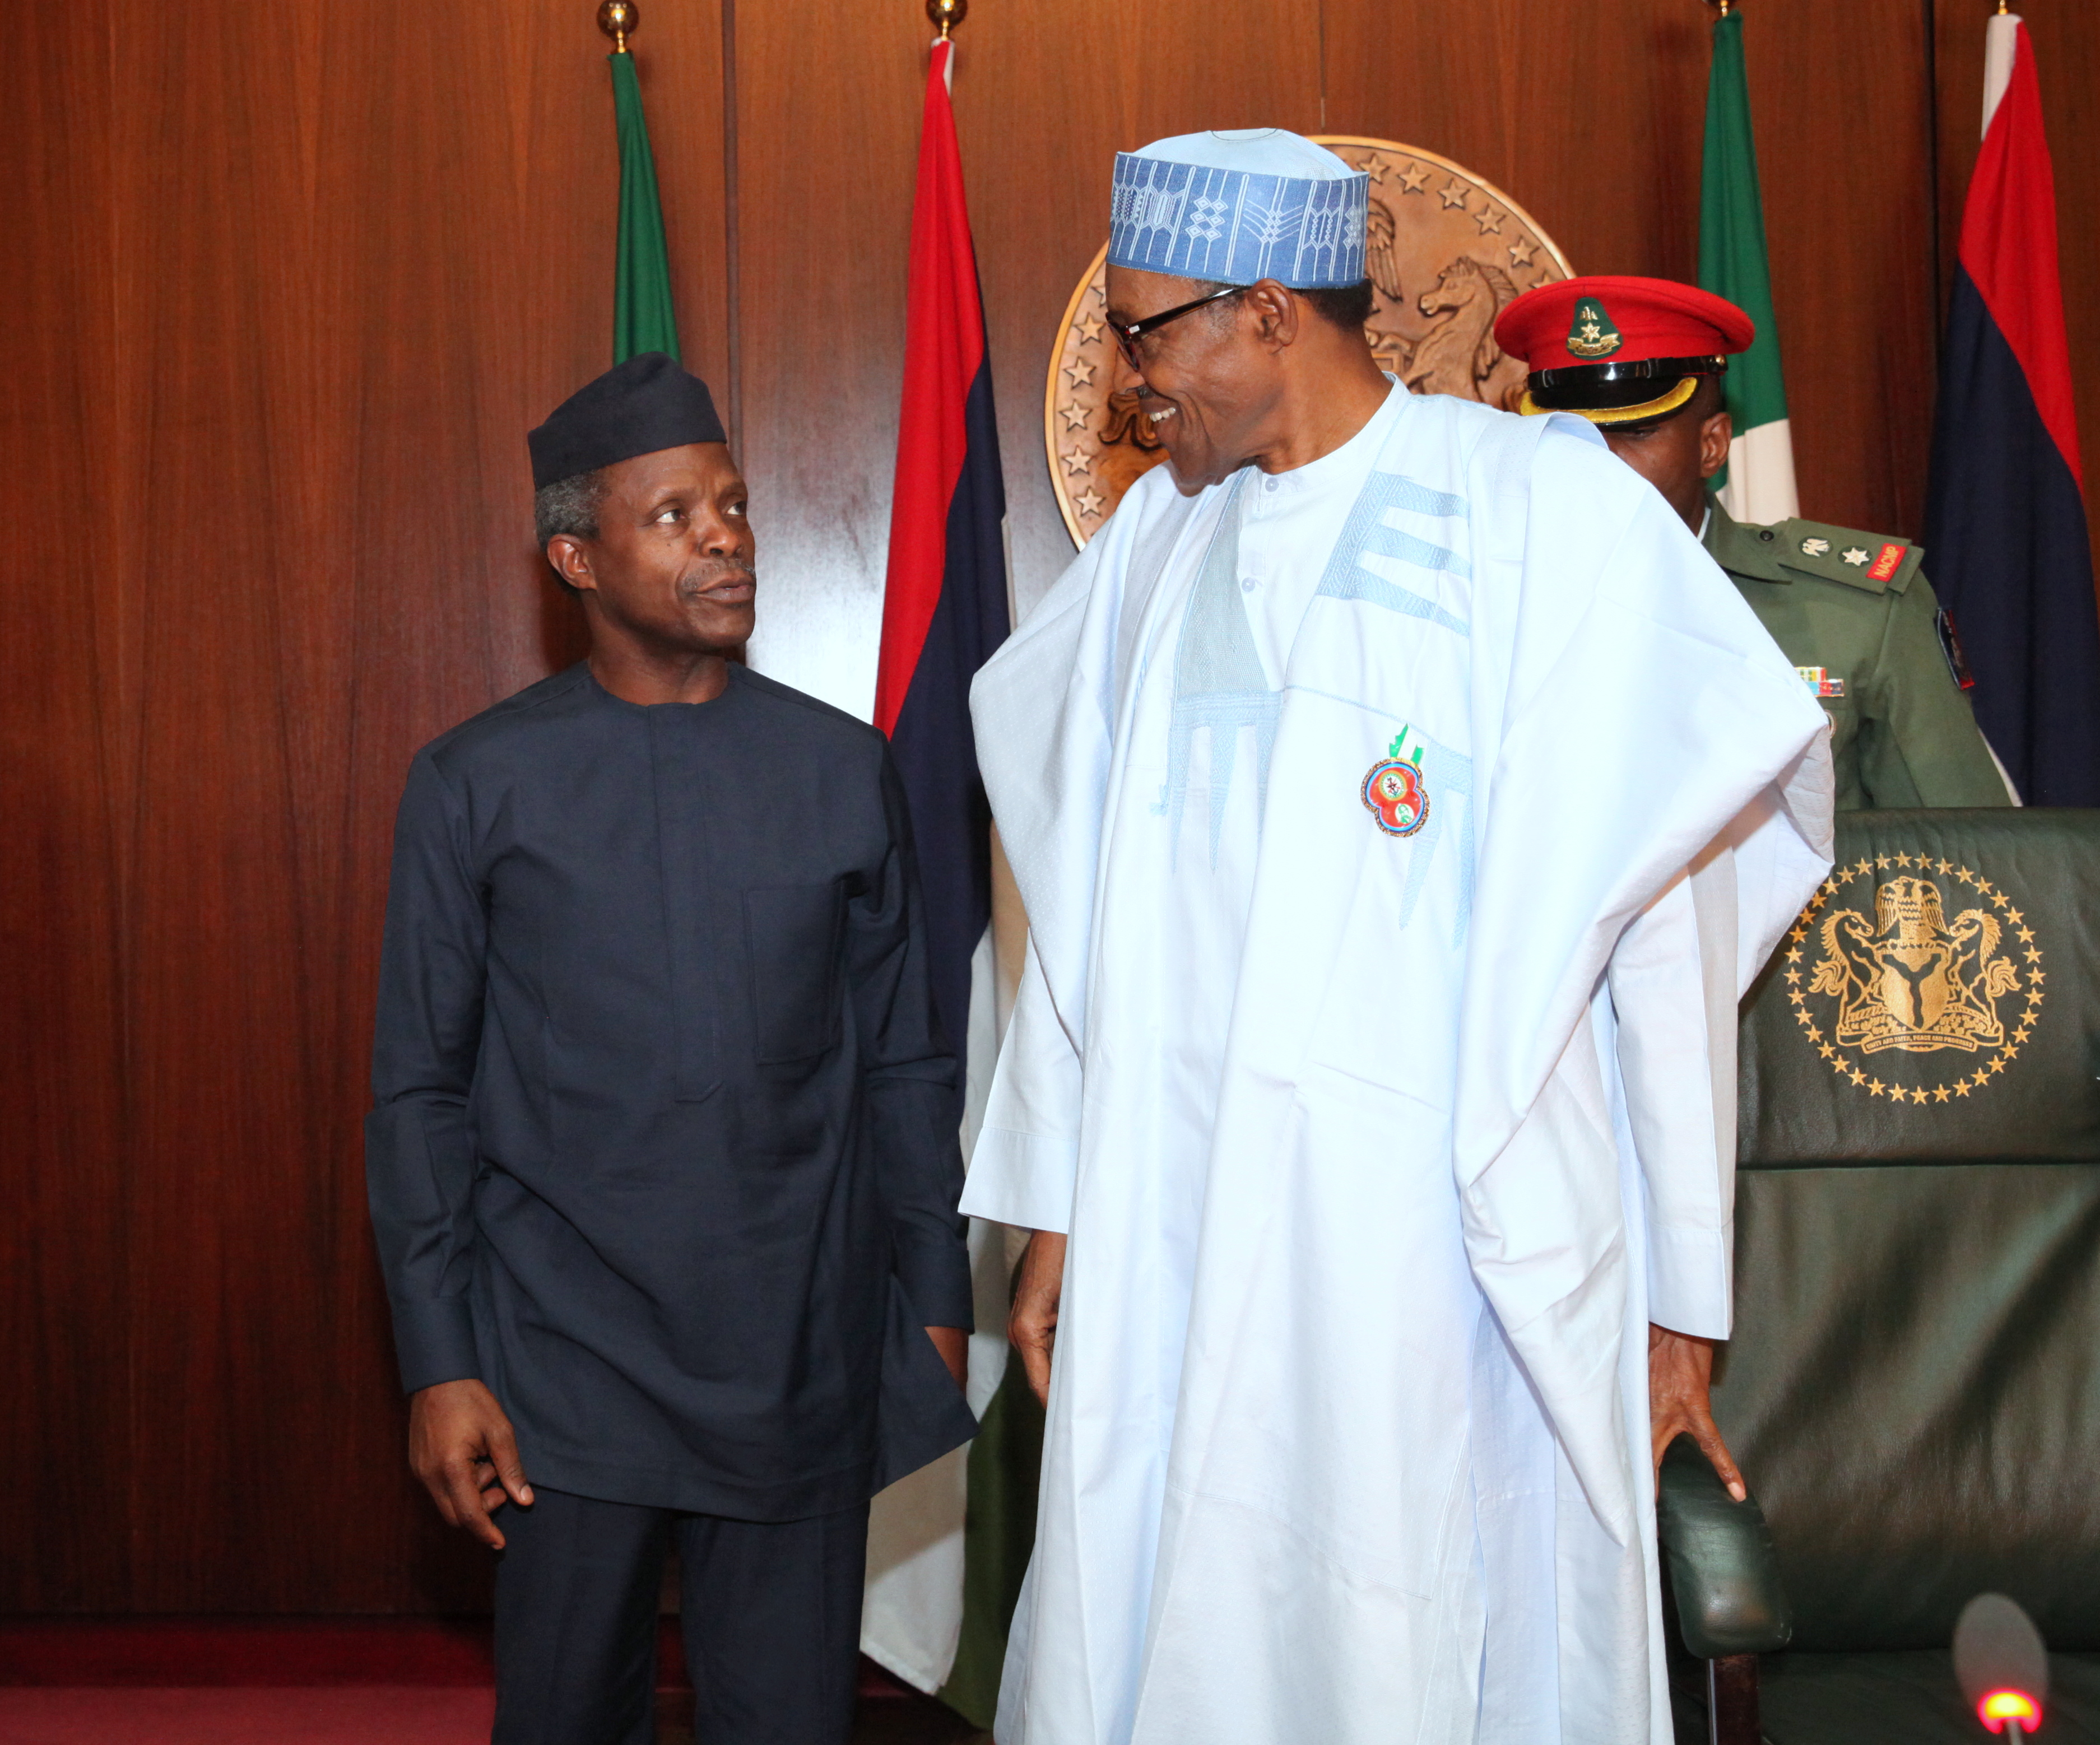 VP Osinbajo At The Emblem Appeal Launch For Armed Forces Remembrance Day Celebration On 16/11/2015